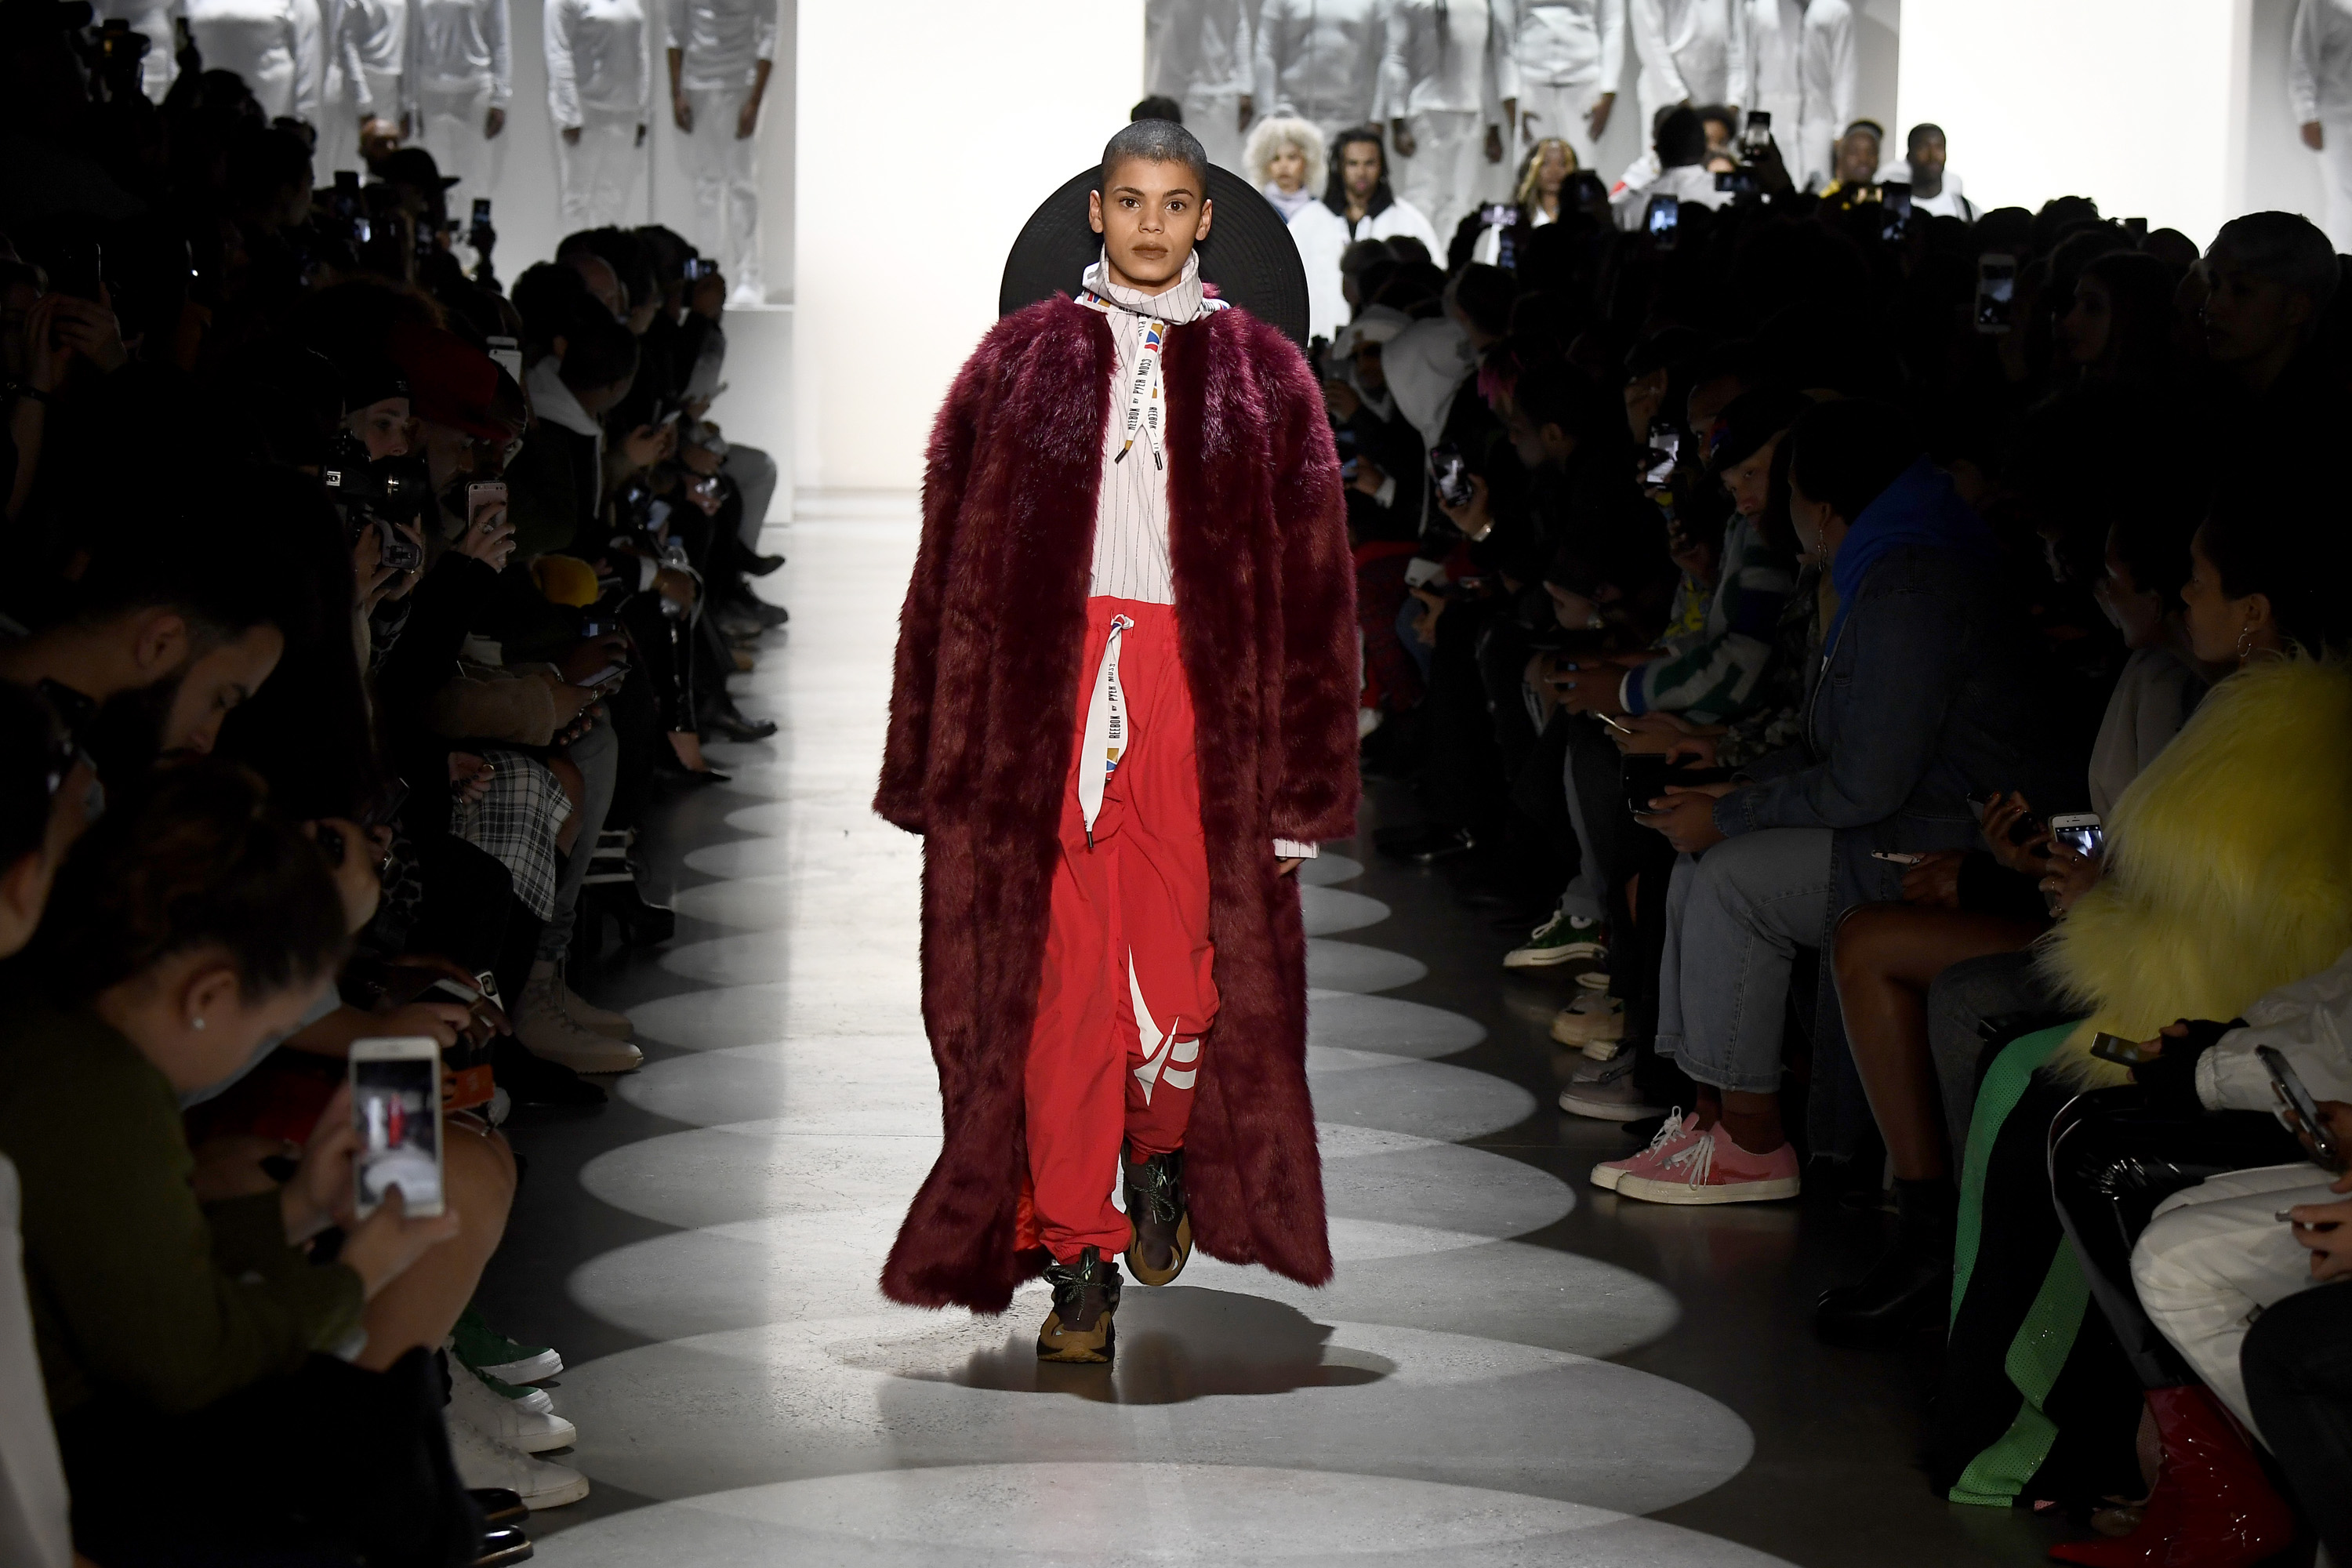 Reebok, Pyer Moss, and the gospel of black beauty at Fashion Week